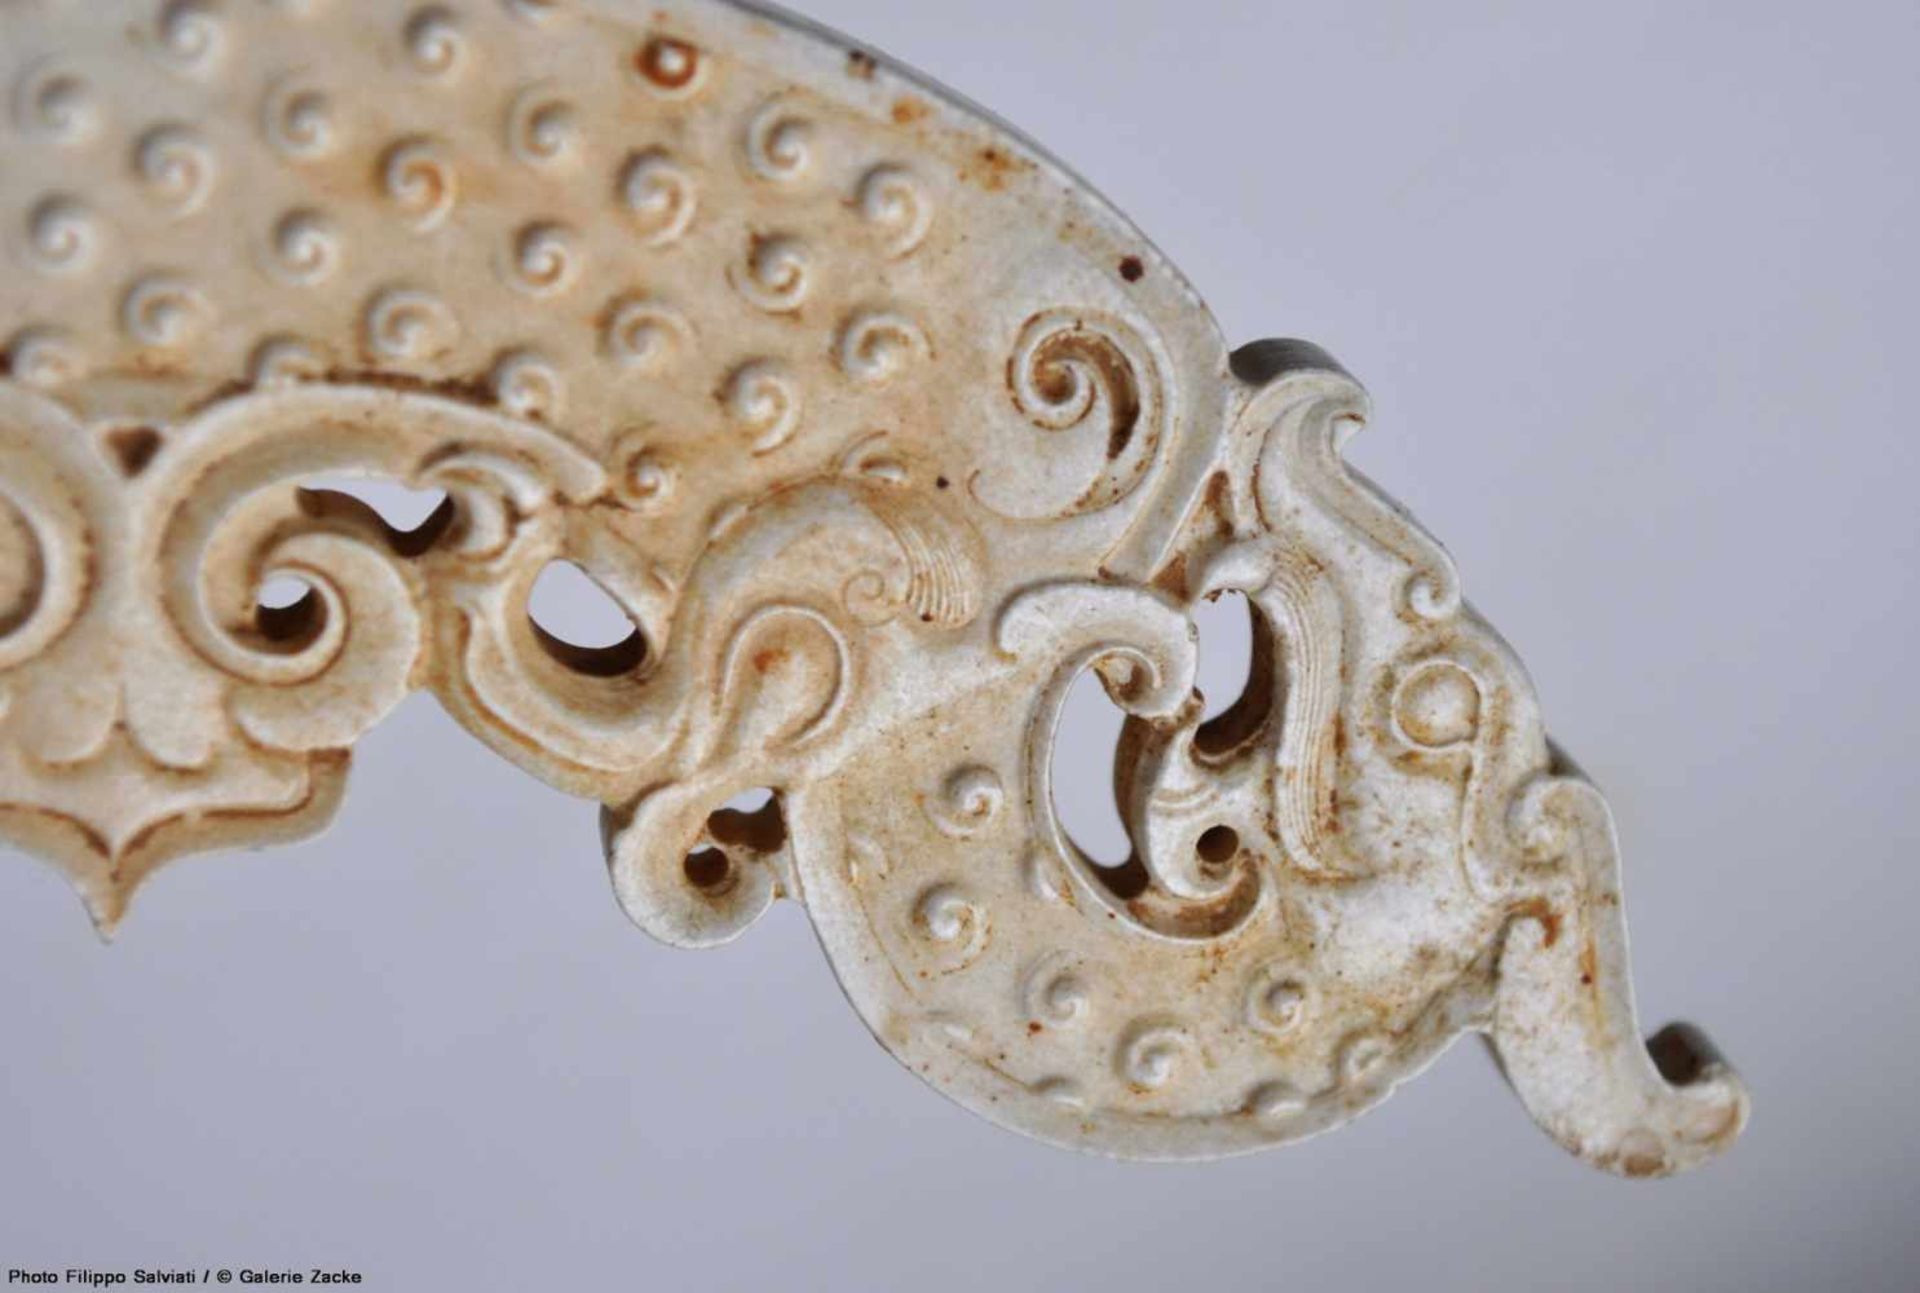 A REMARKABLE HUANG WITH FINELY DETAILED SINUOUS DRAGONS IN IVORY-LIKE JADE Jade. China, Eastern - Image 8 of 10